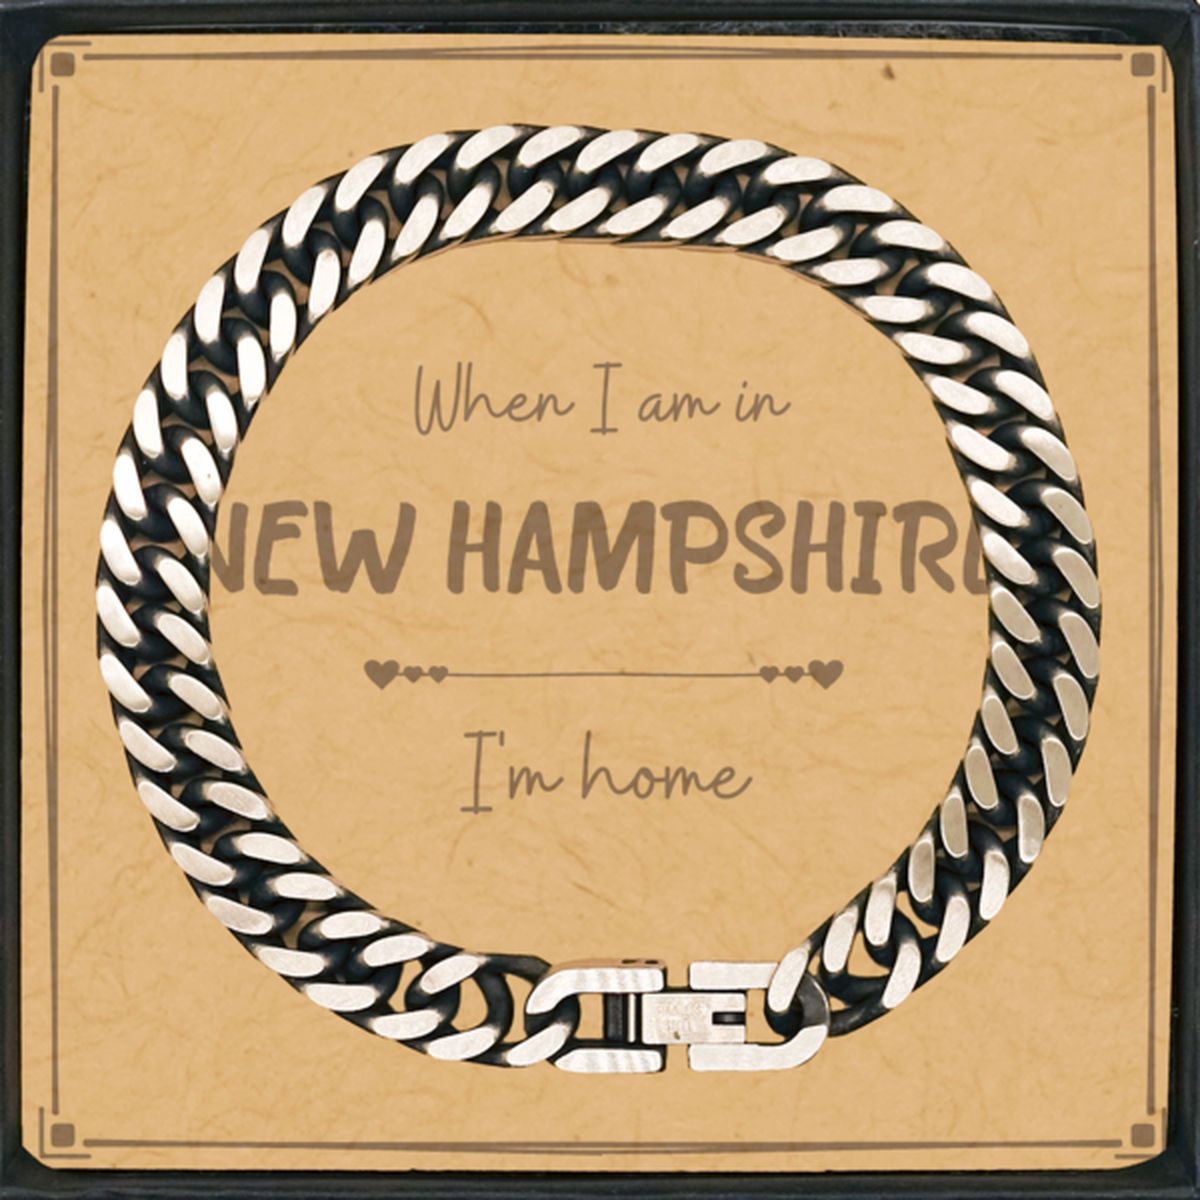 When I am in New Hampshire I'm home Cuban Link Chain Bracelet, Message Card Gifts For New Hampshire, State New Hampshire Birthday Gifts for Friends Coworker